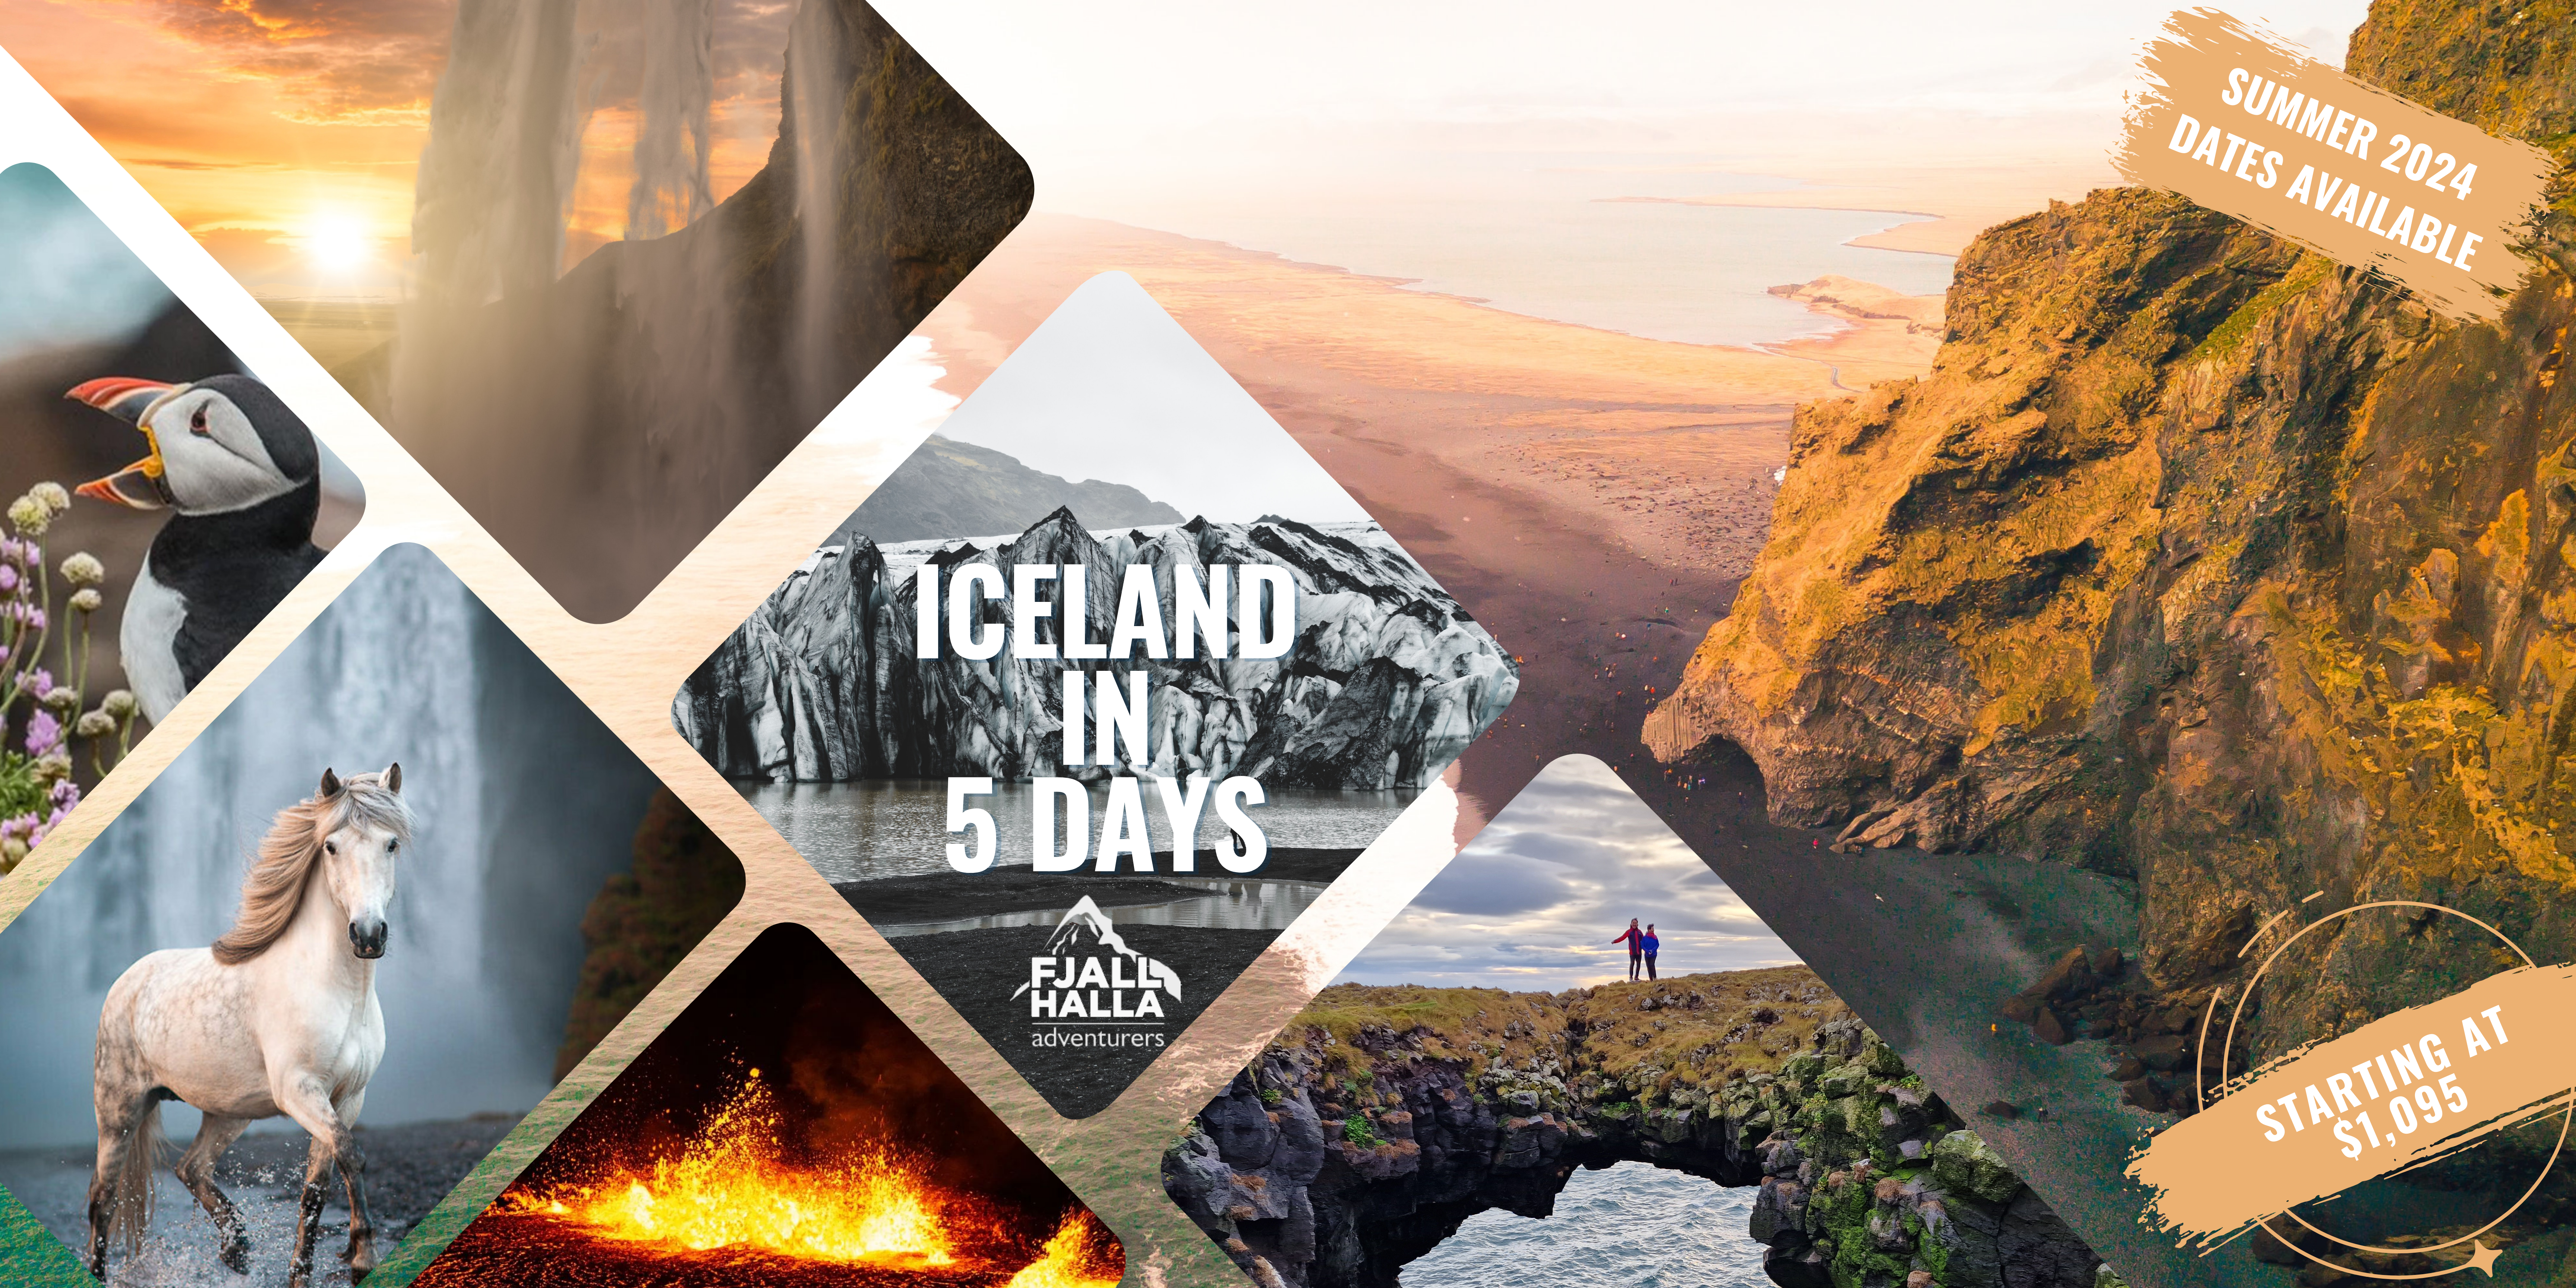 Iceland in 5 Days - The best of Iceland in 5 Days